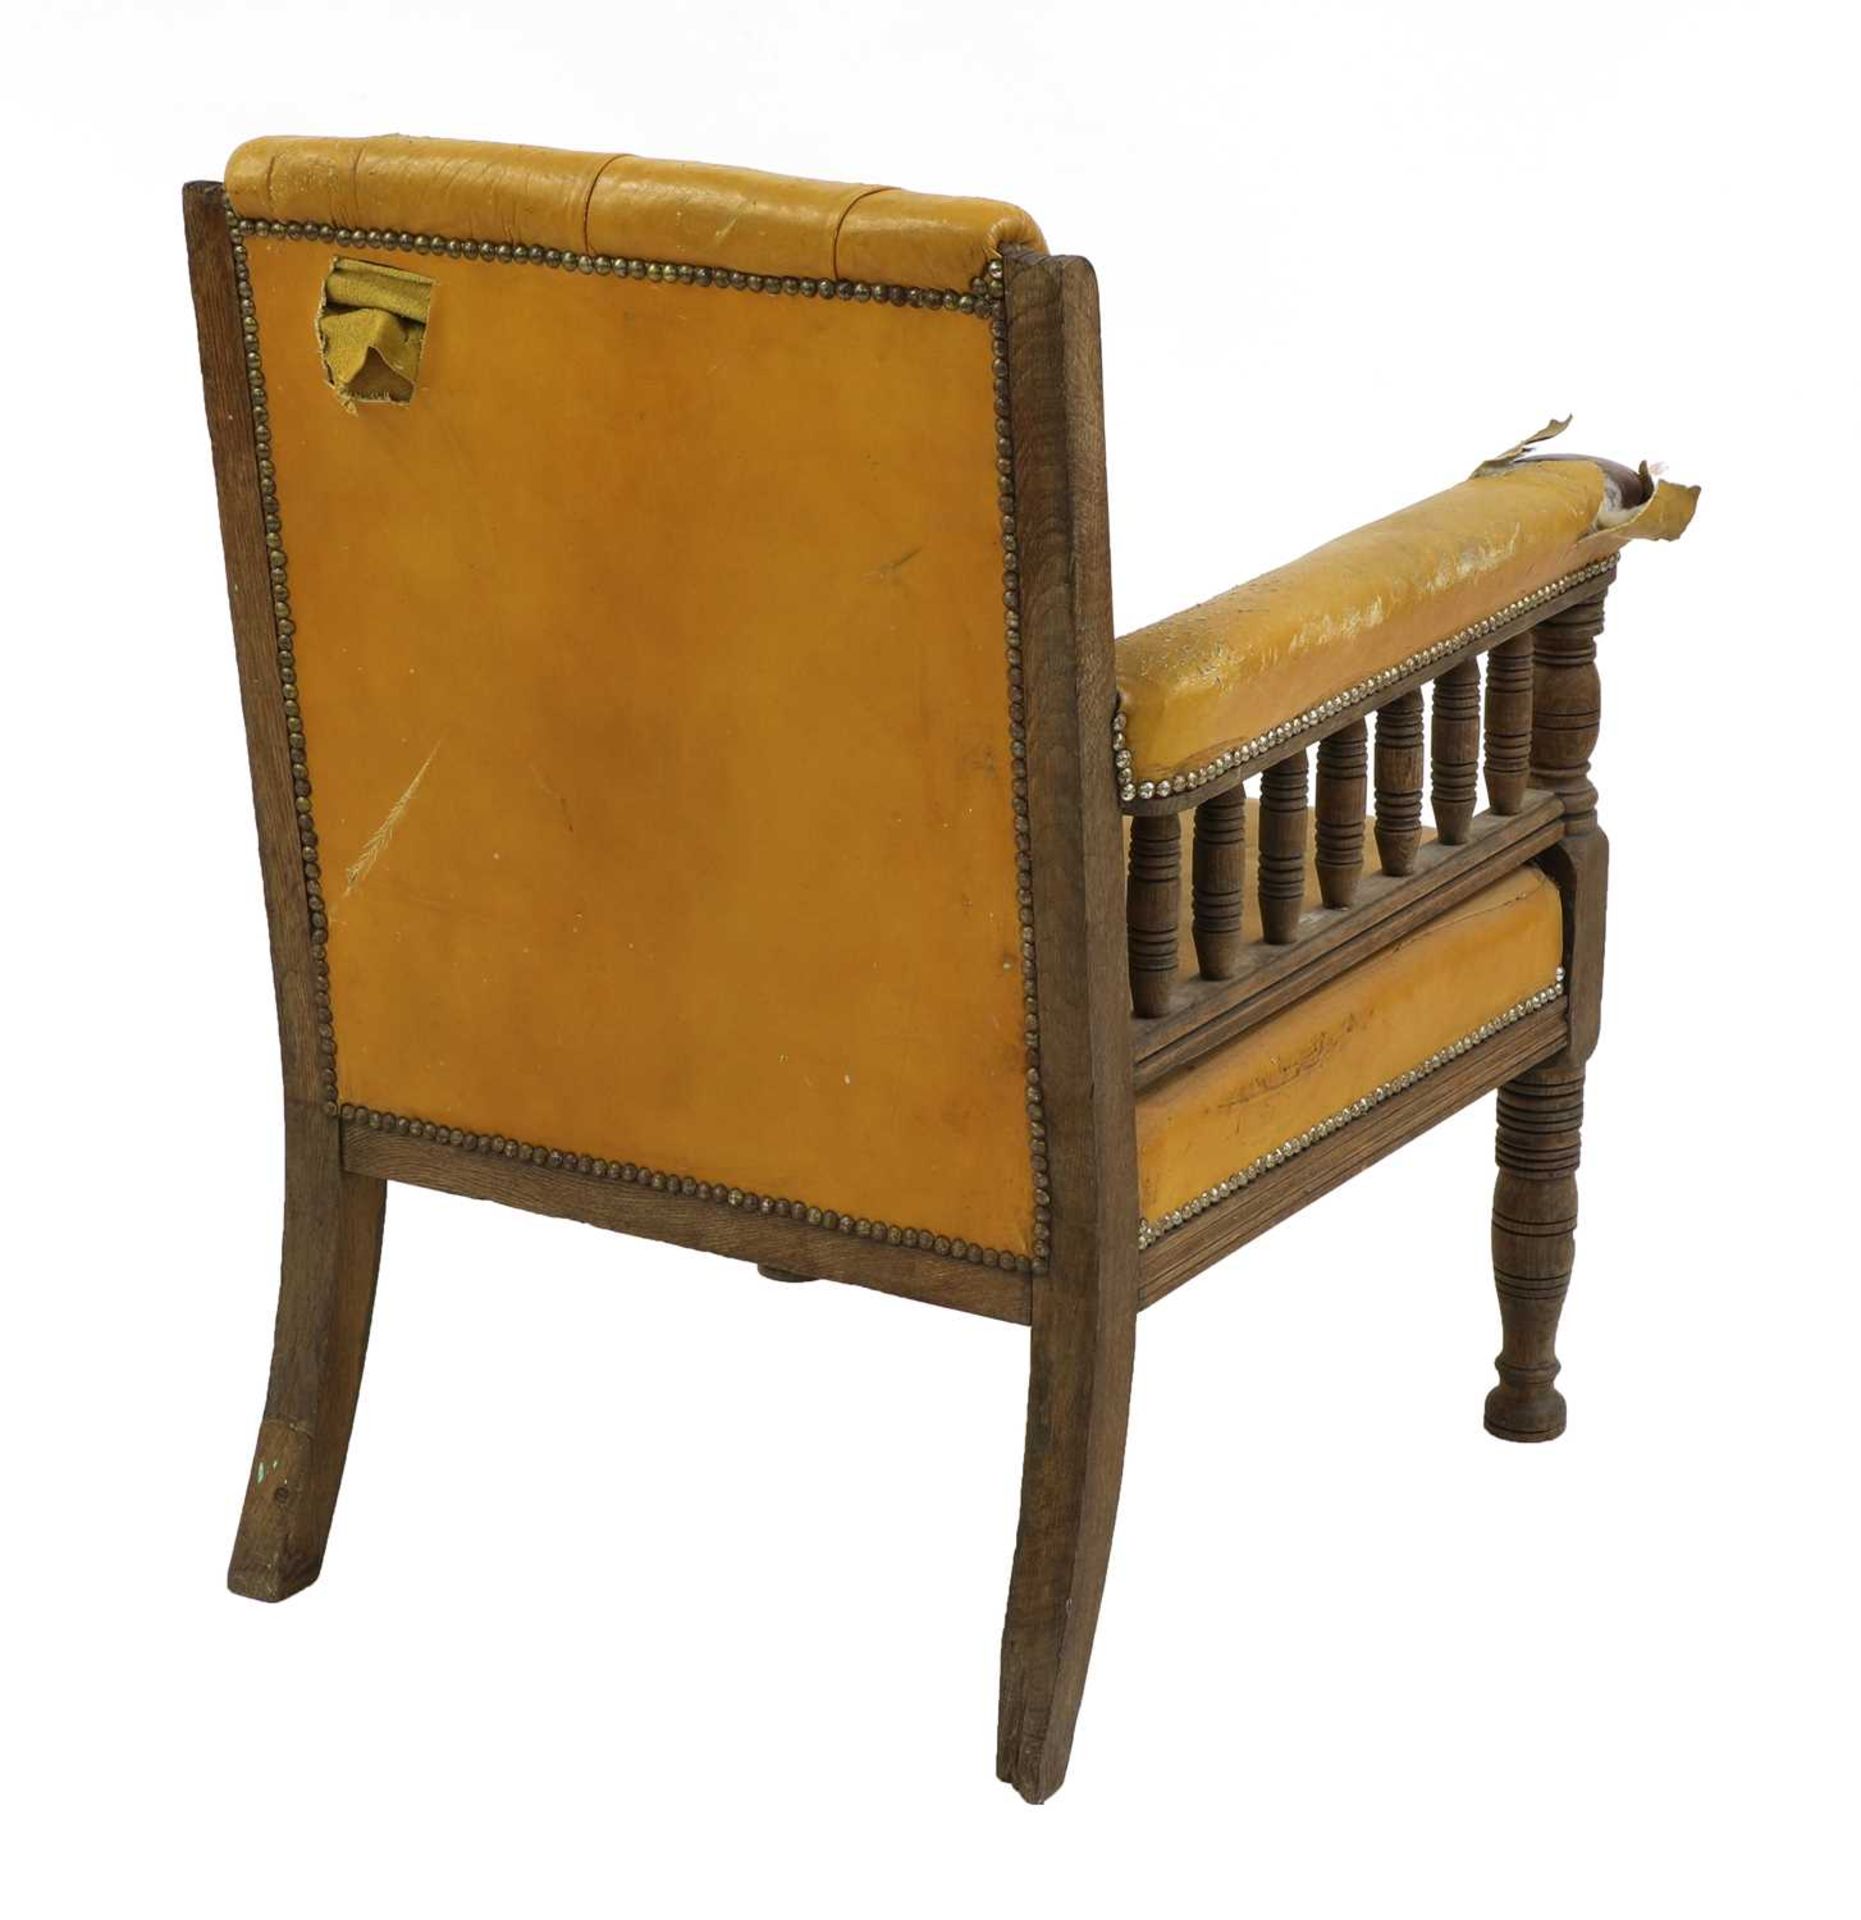 An Aesthetic Movement library chair, - Image 3 of 3